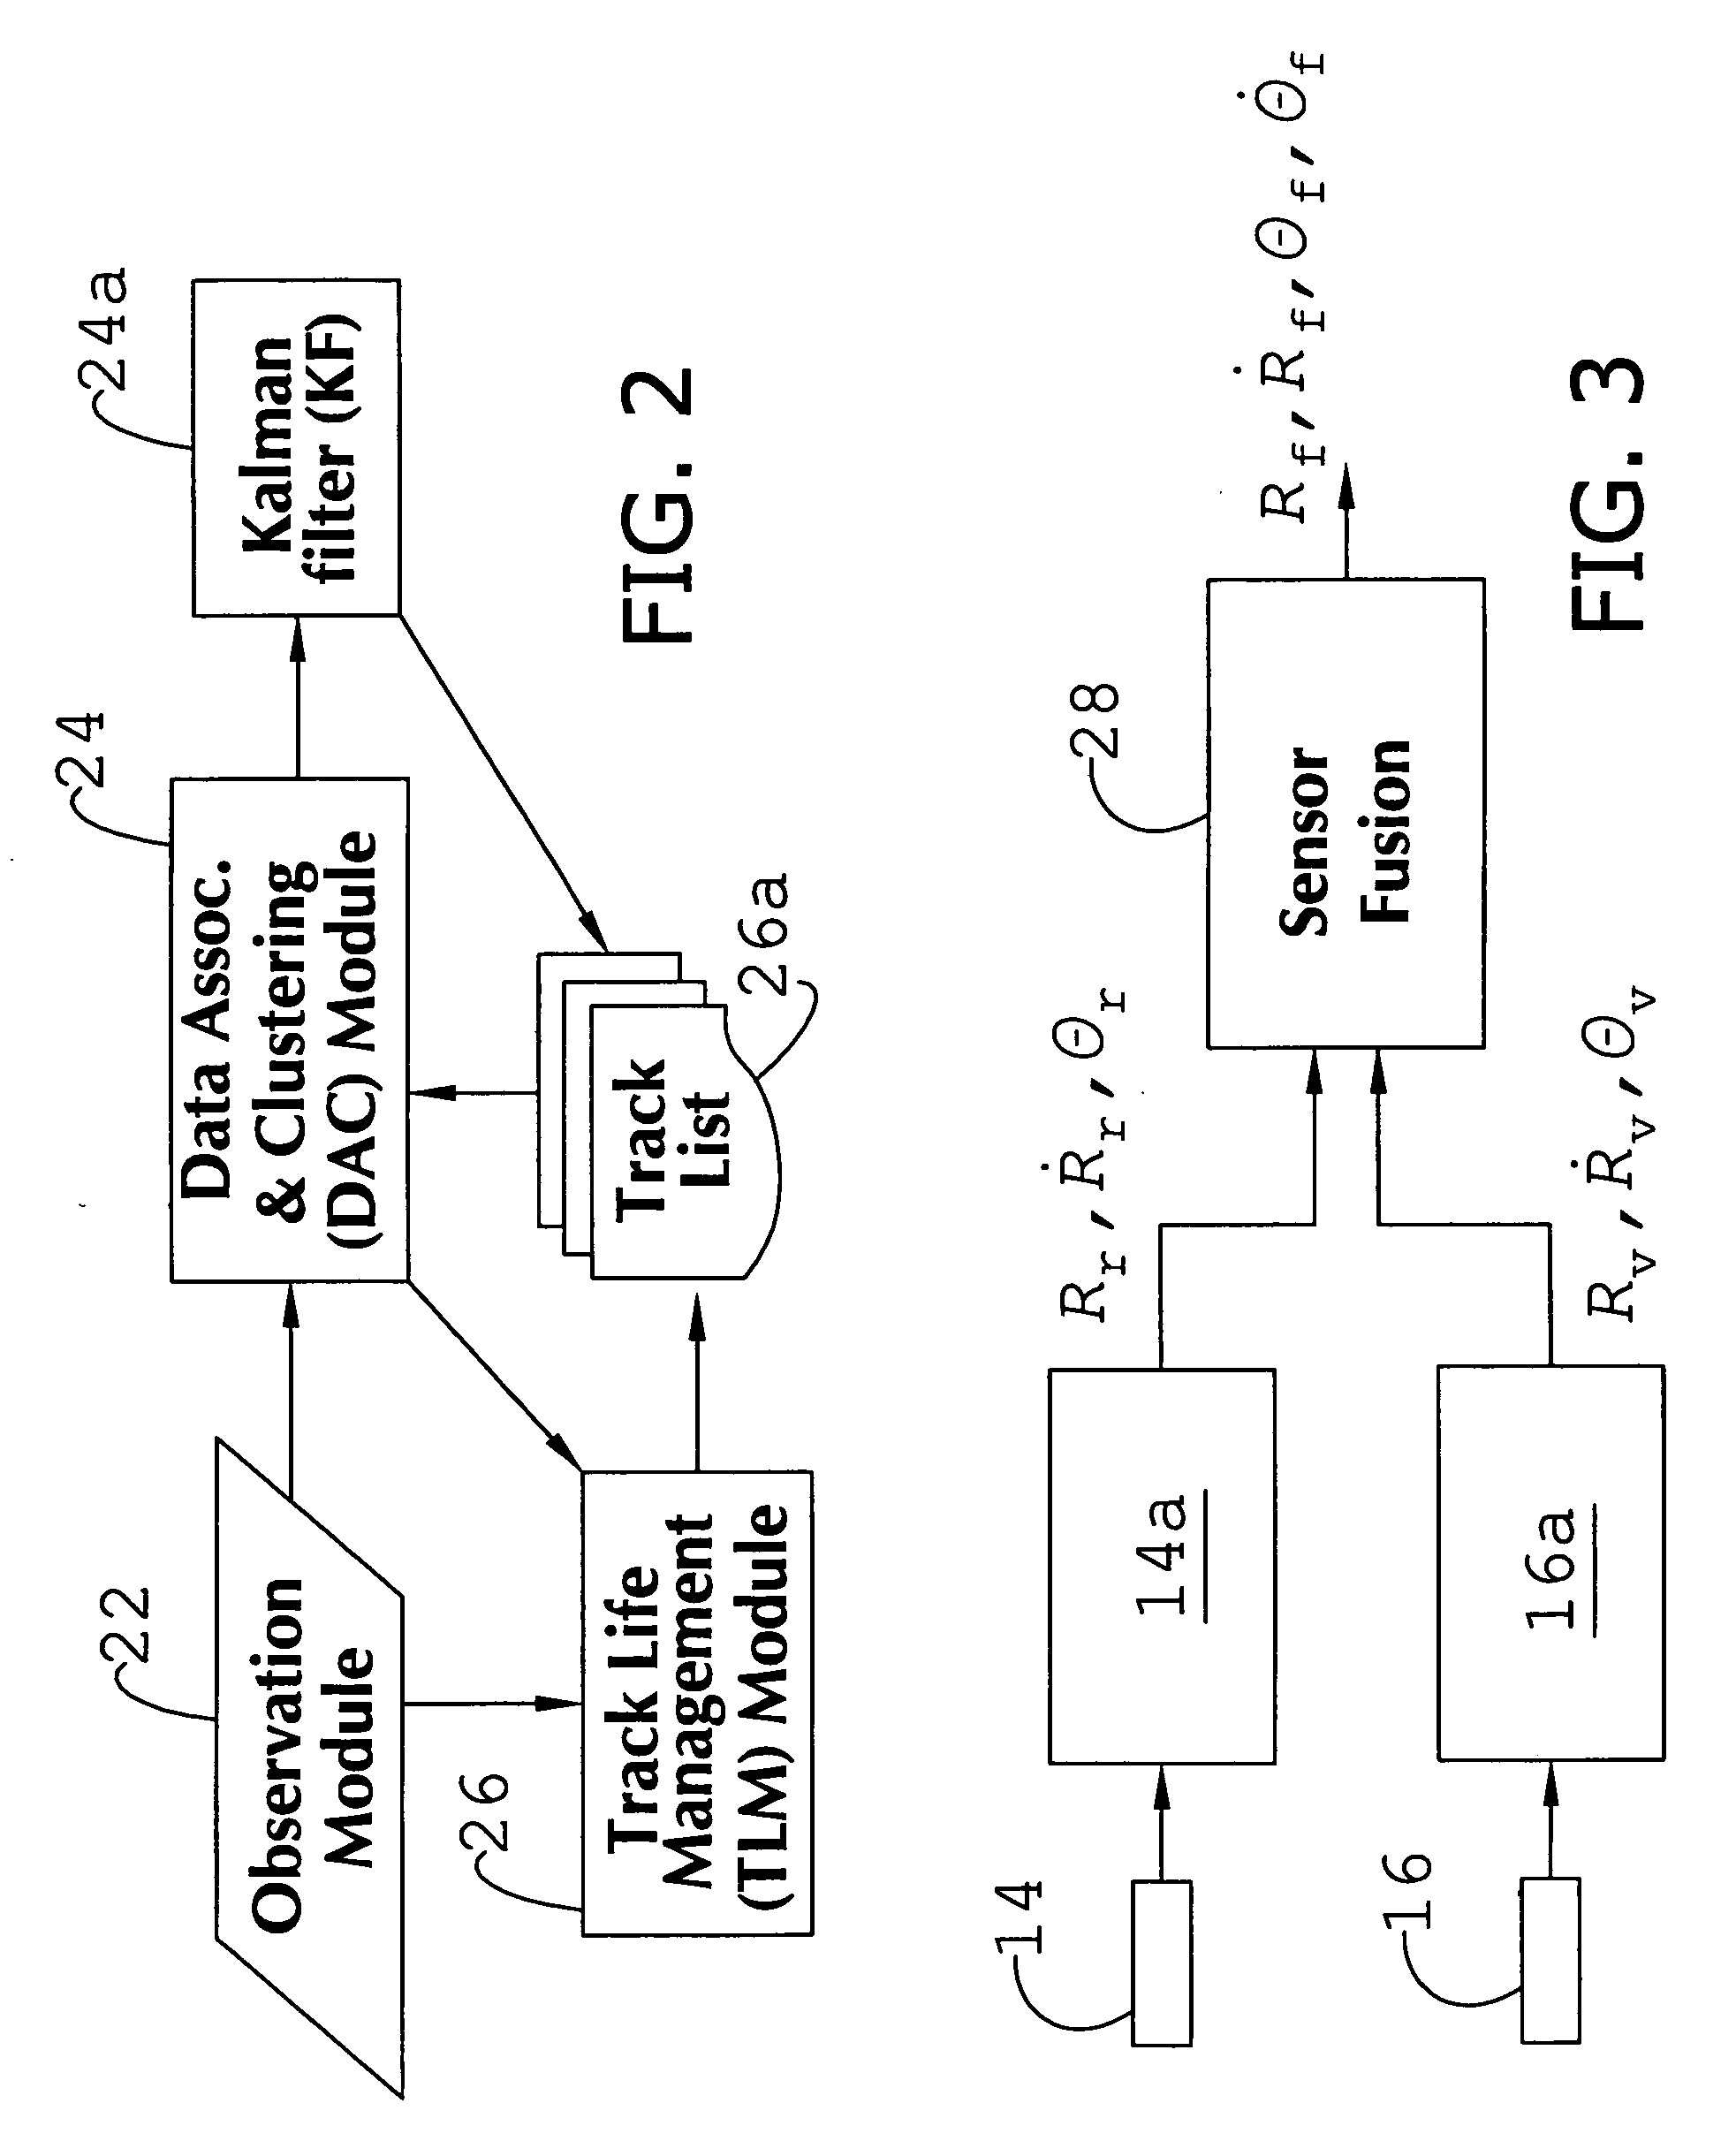 System and method of target tracking using sensor fusion